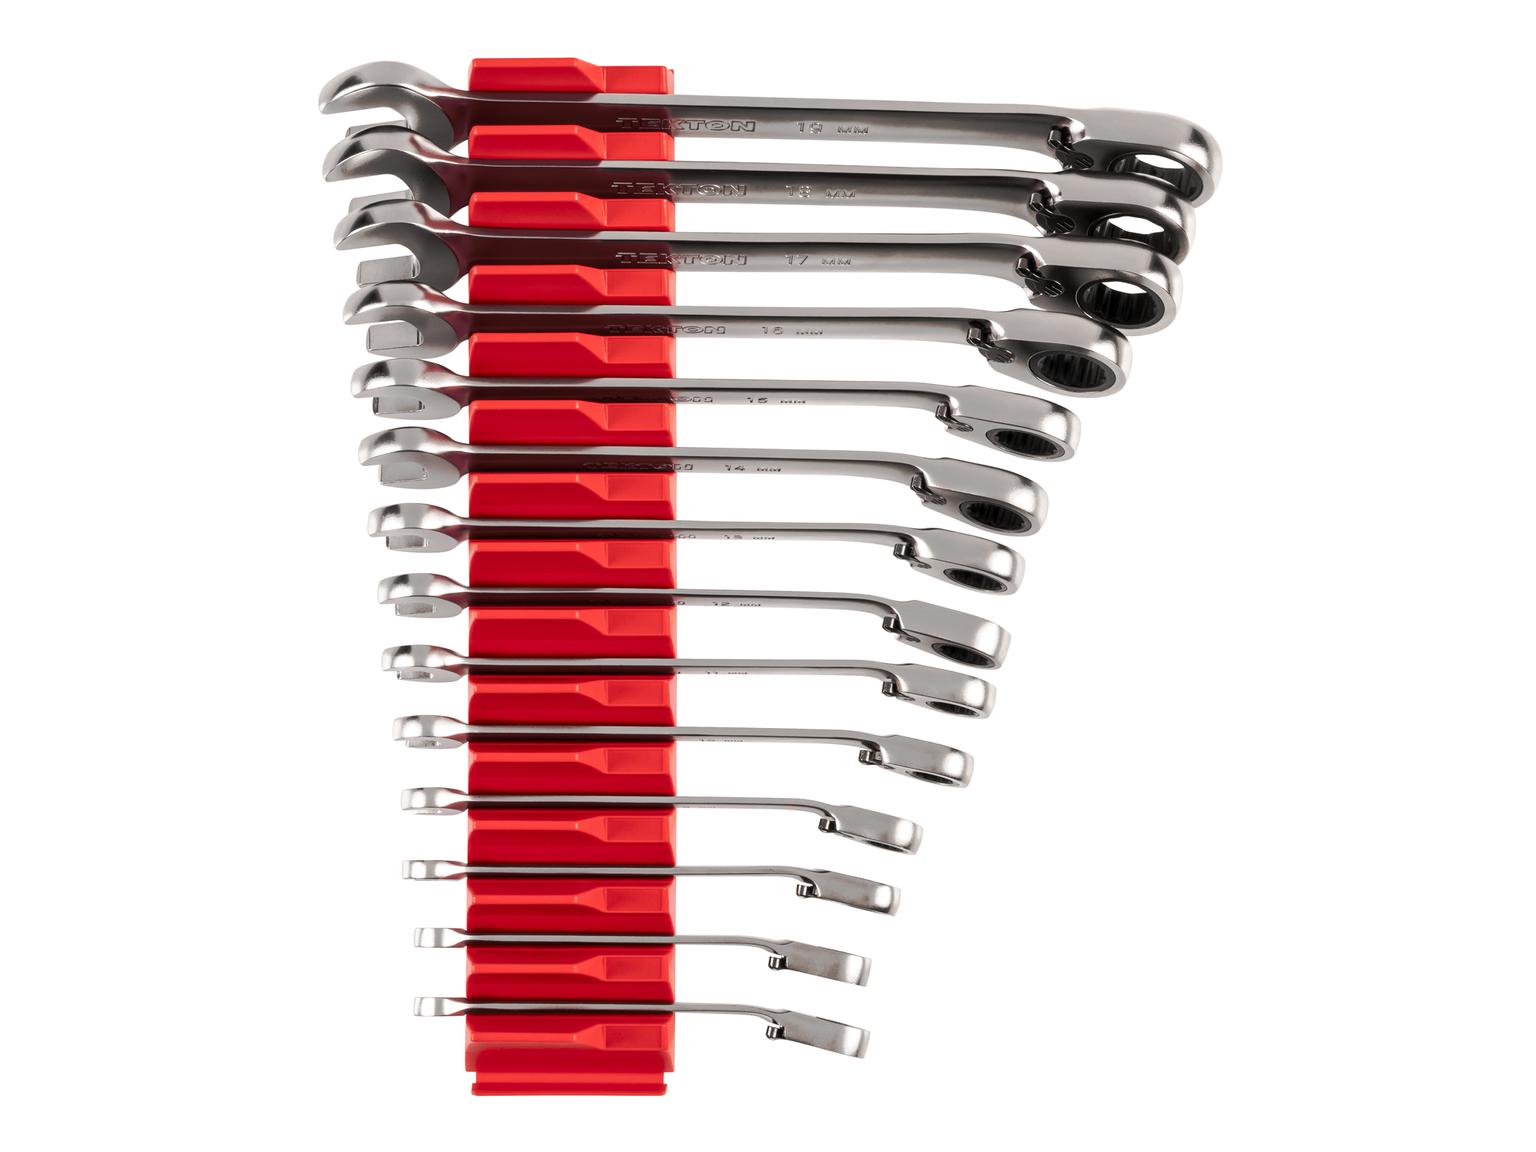 Reversible 12-Point Ratcheting Combination Wrench Set, 14-Piece (Modular Slotted Organizer)